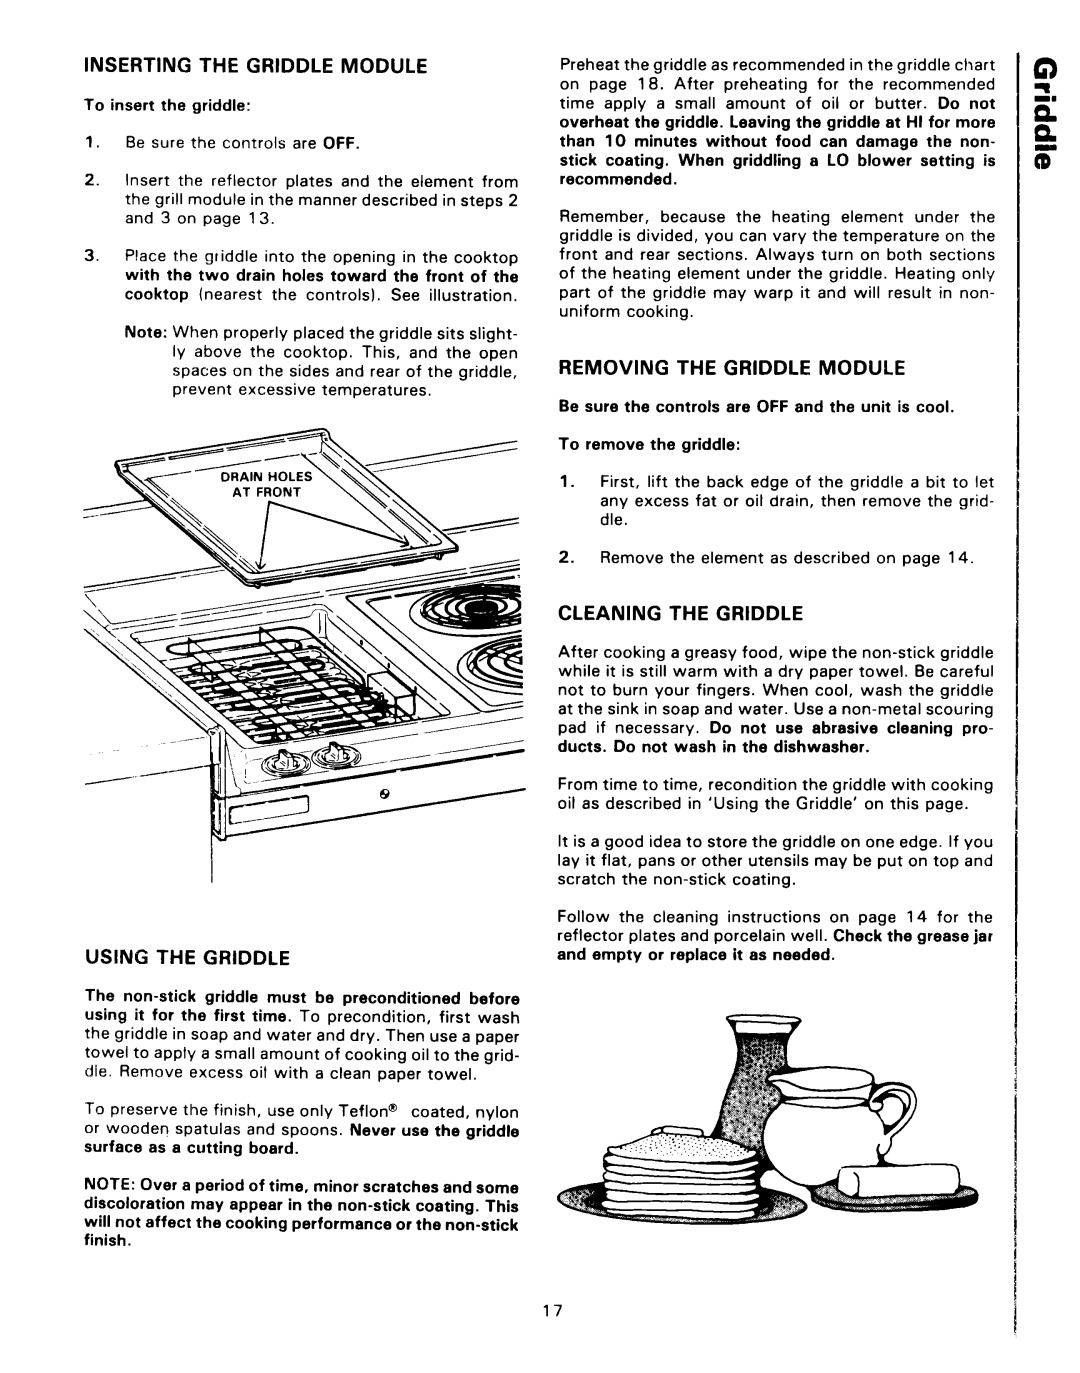 Roper 4347928 (333240-1) manual Inserting The Griddle Module, Removing The Griddle Module, Using The Griddle 